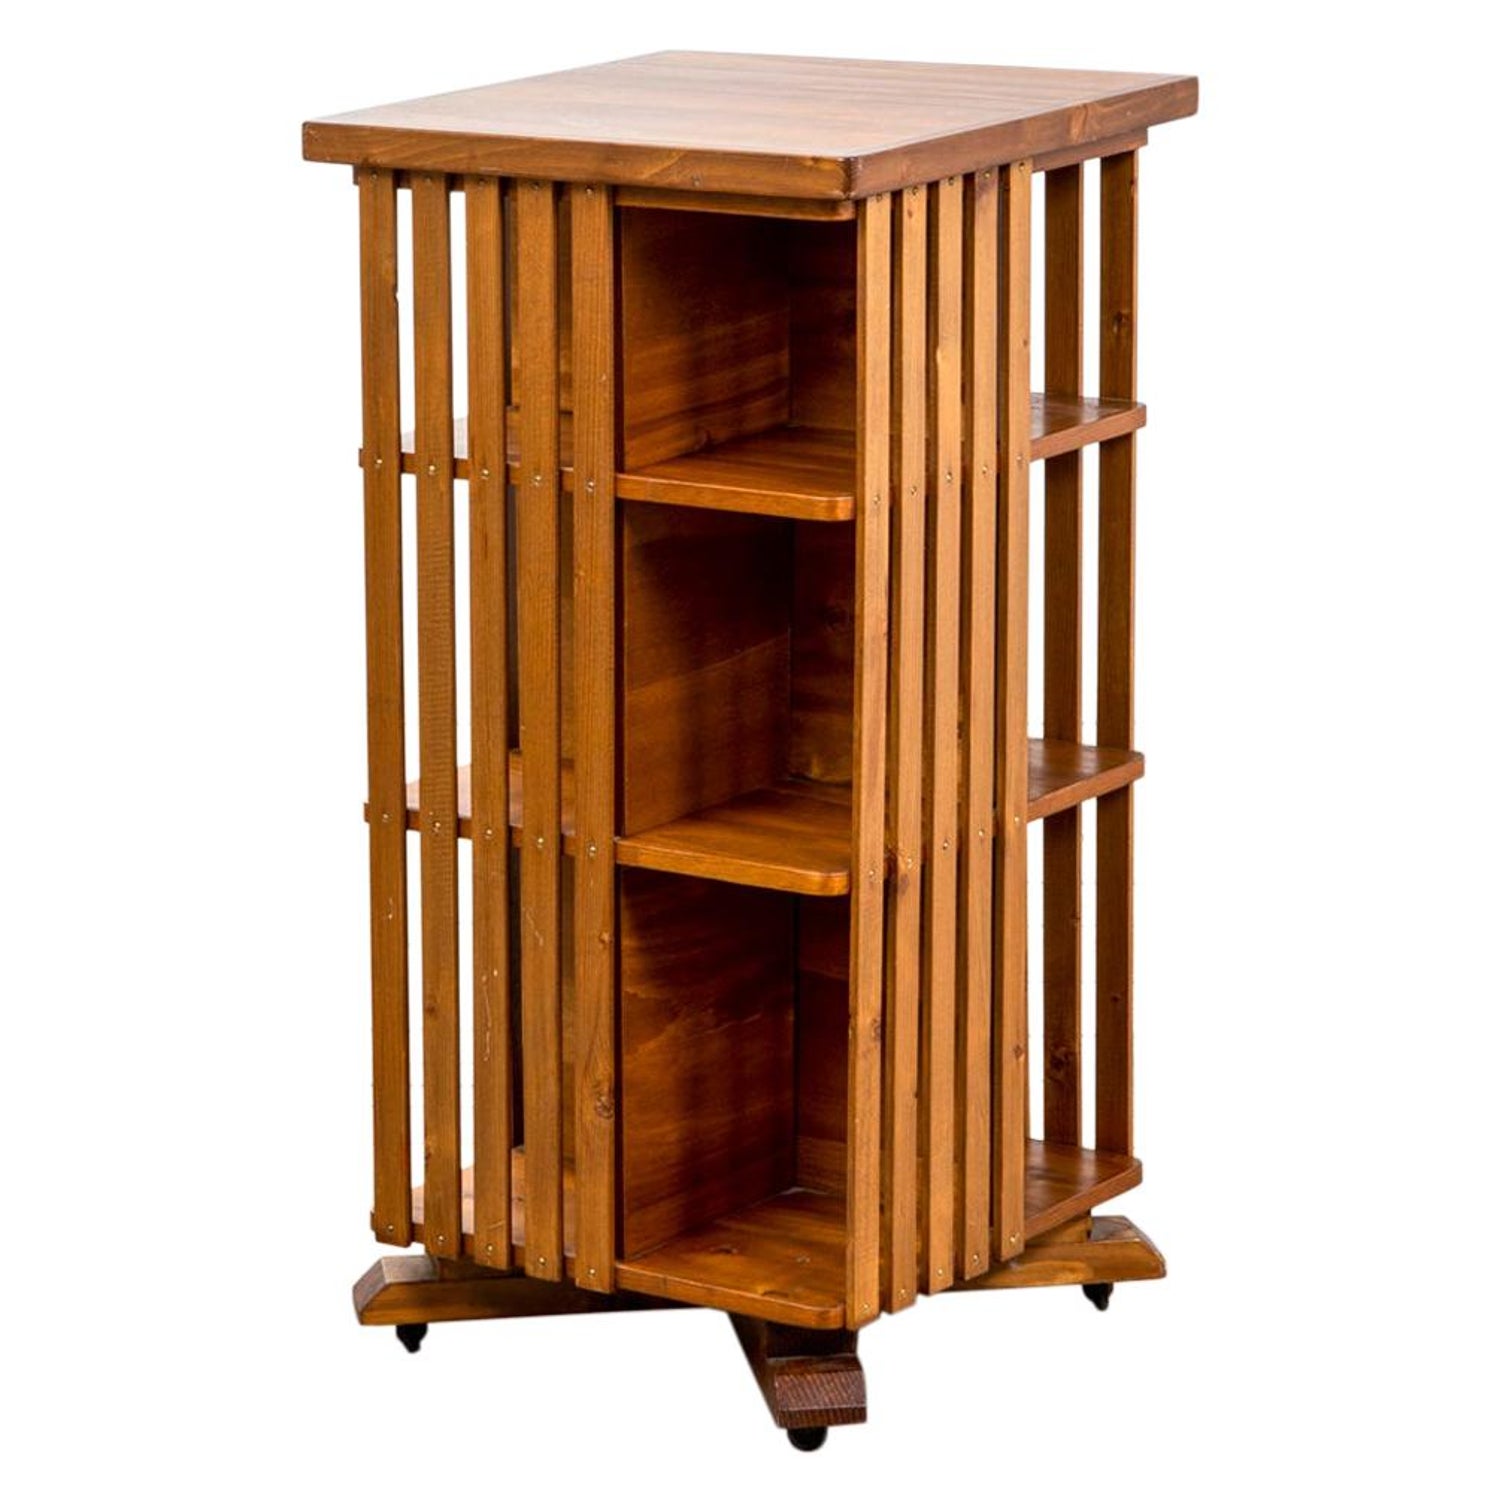 20th Century Bookcase With Shelves And, Wood Bookcase On Wheels